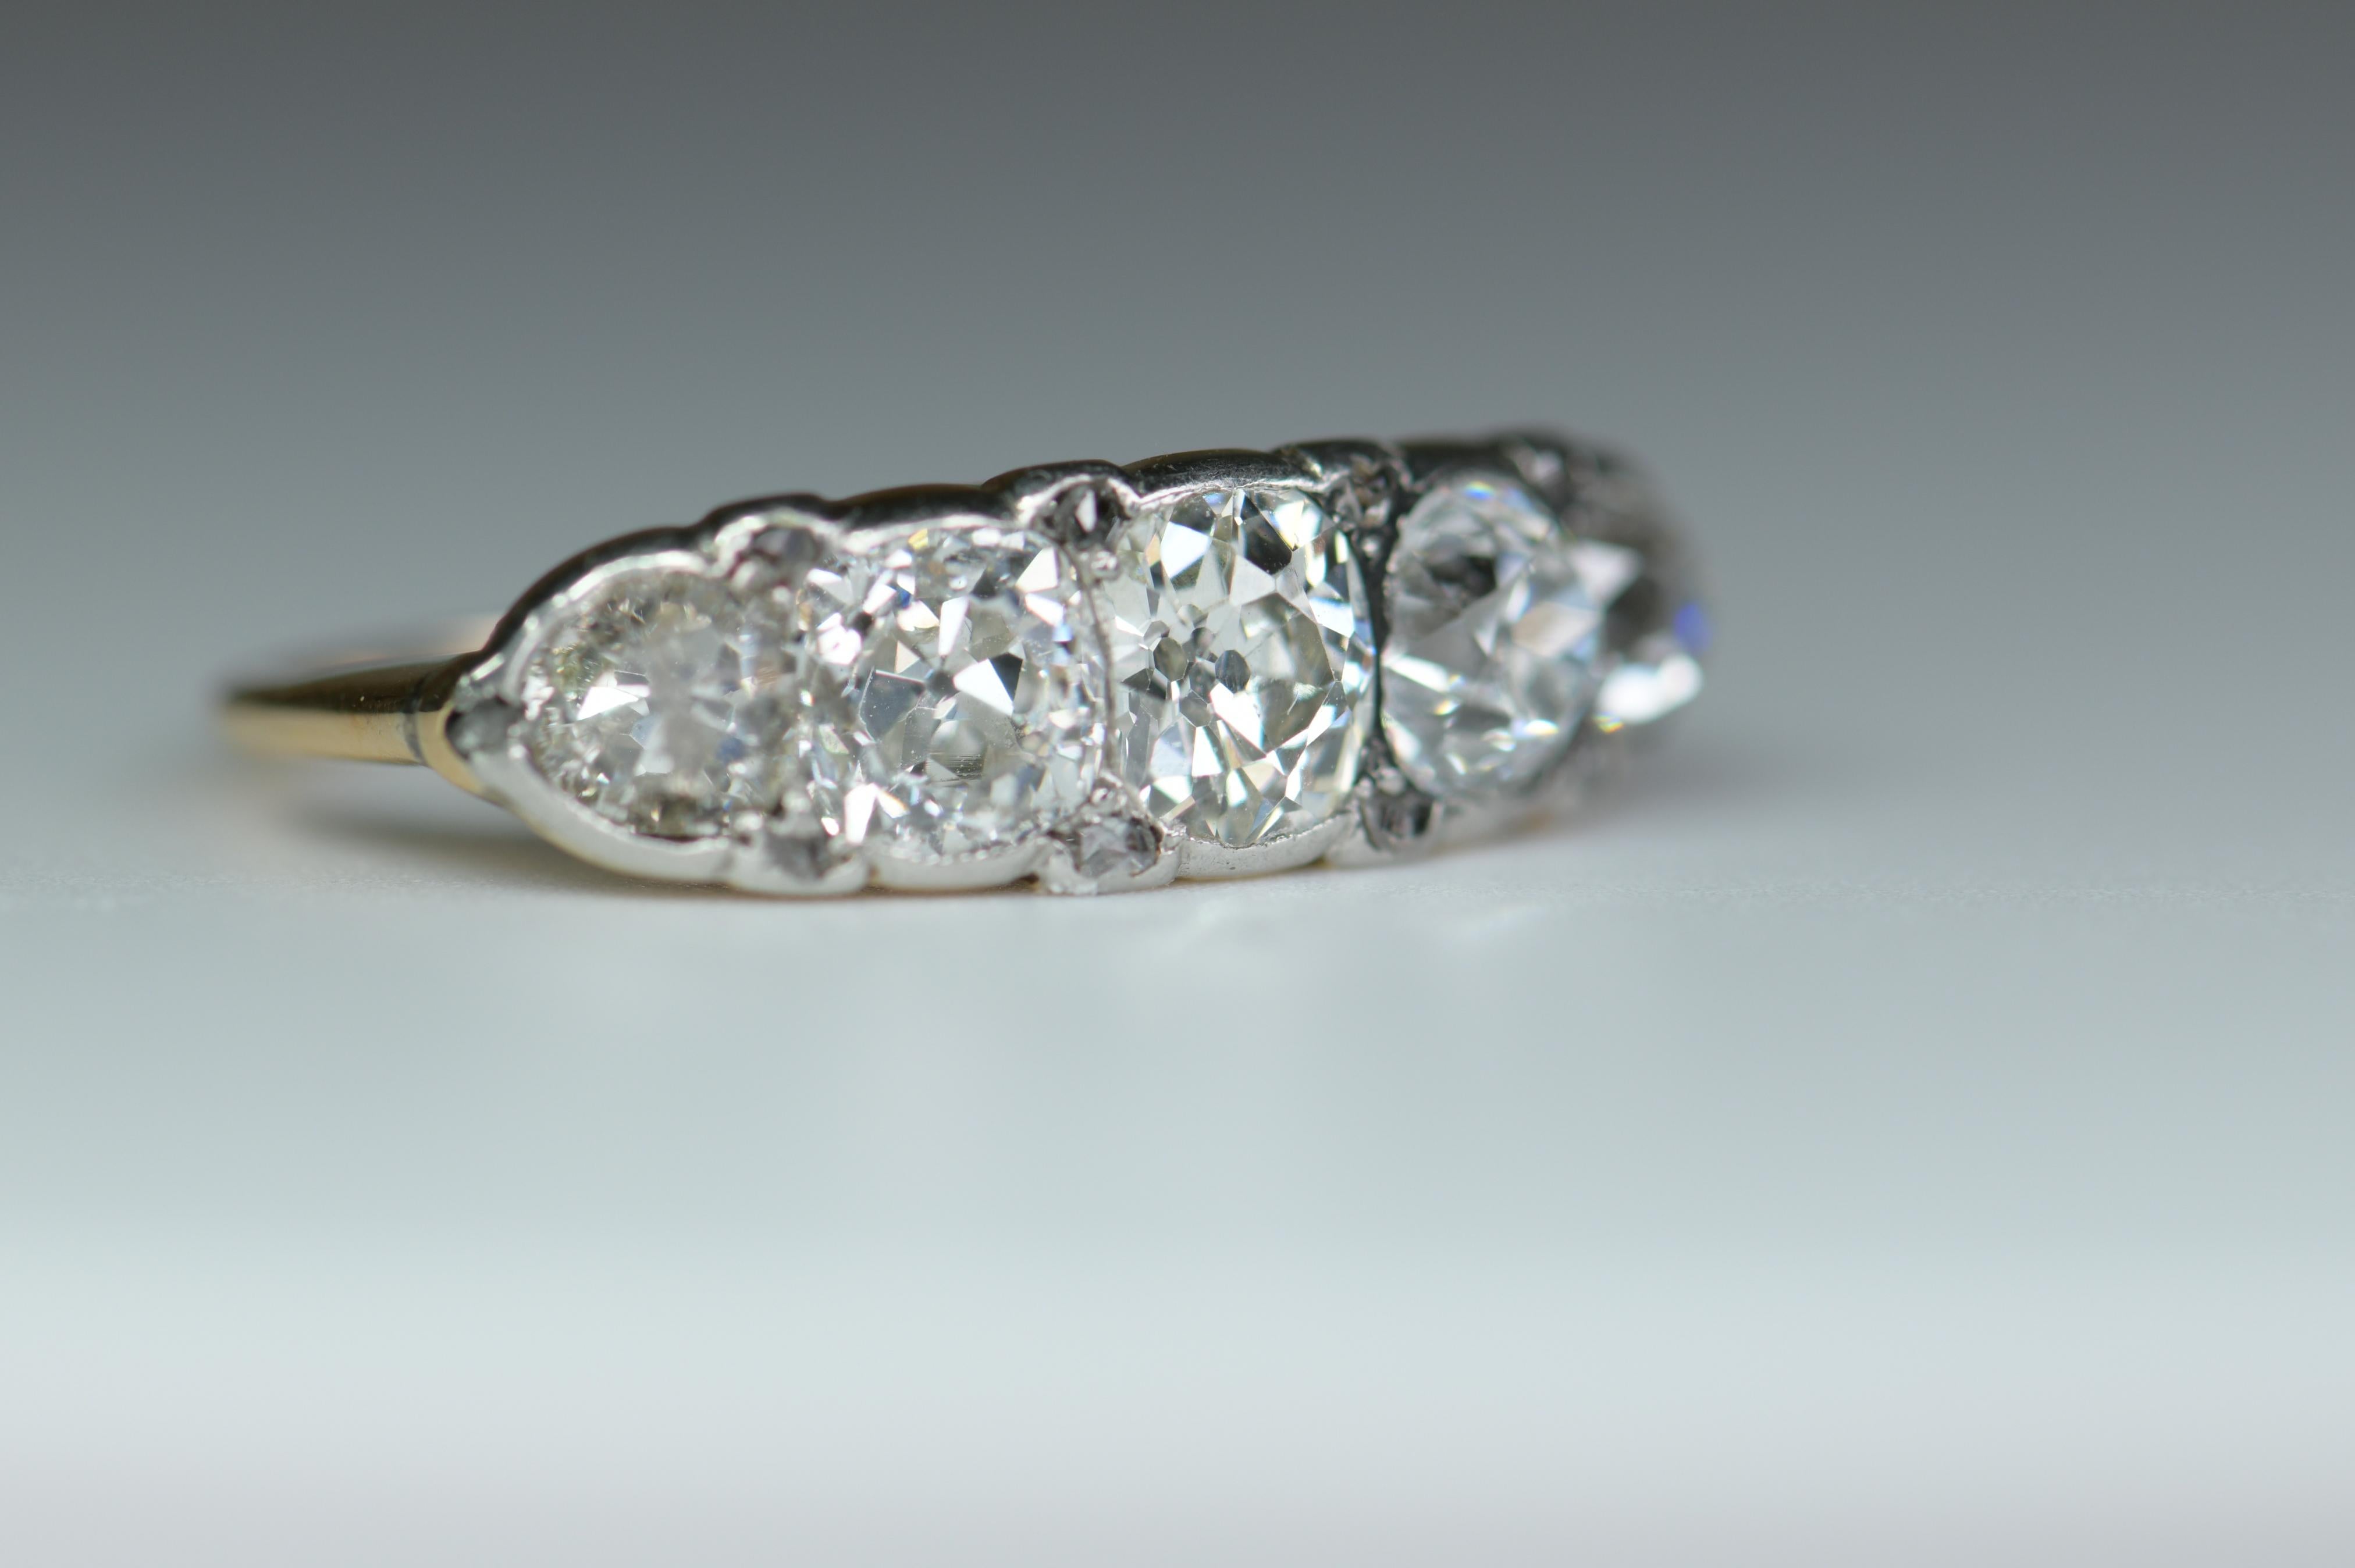 A stunning Victorian diamond quintet line ring, liner set with five graduated old irregular cushion cut diamonds total estimated diamond weight approx 3.2ct. What a wonderful ring to give as an engagement or commitment ring, or just to wear as a